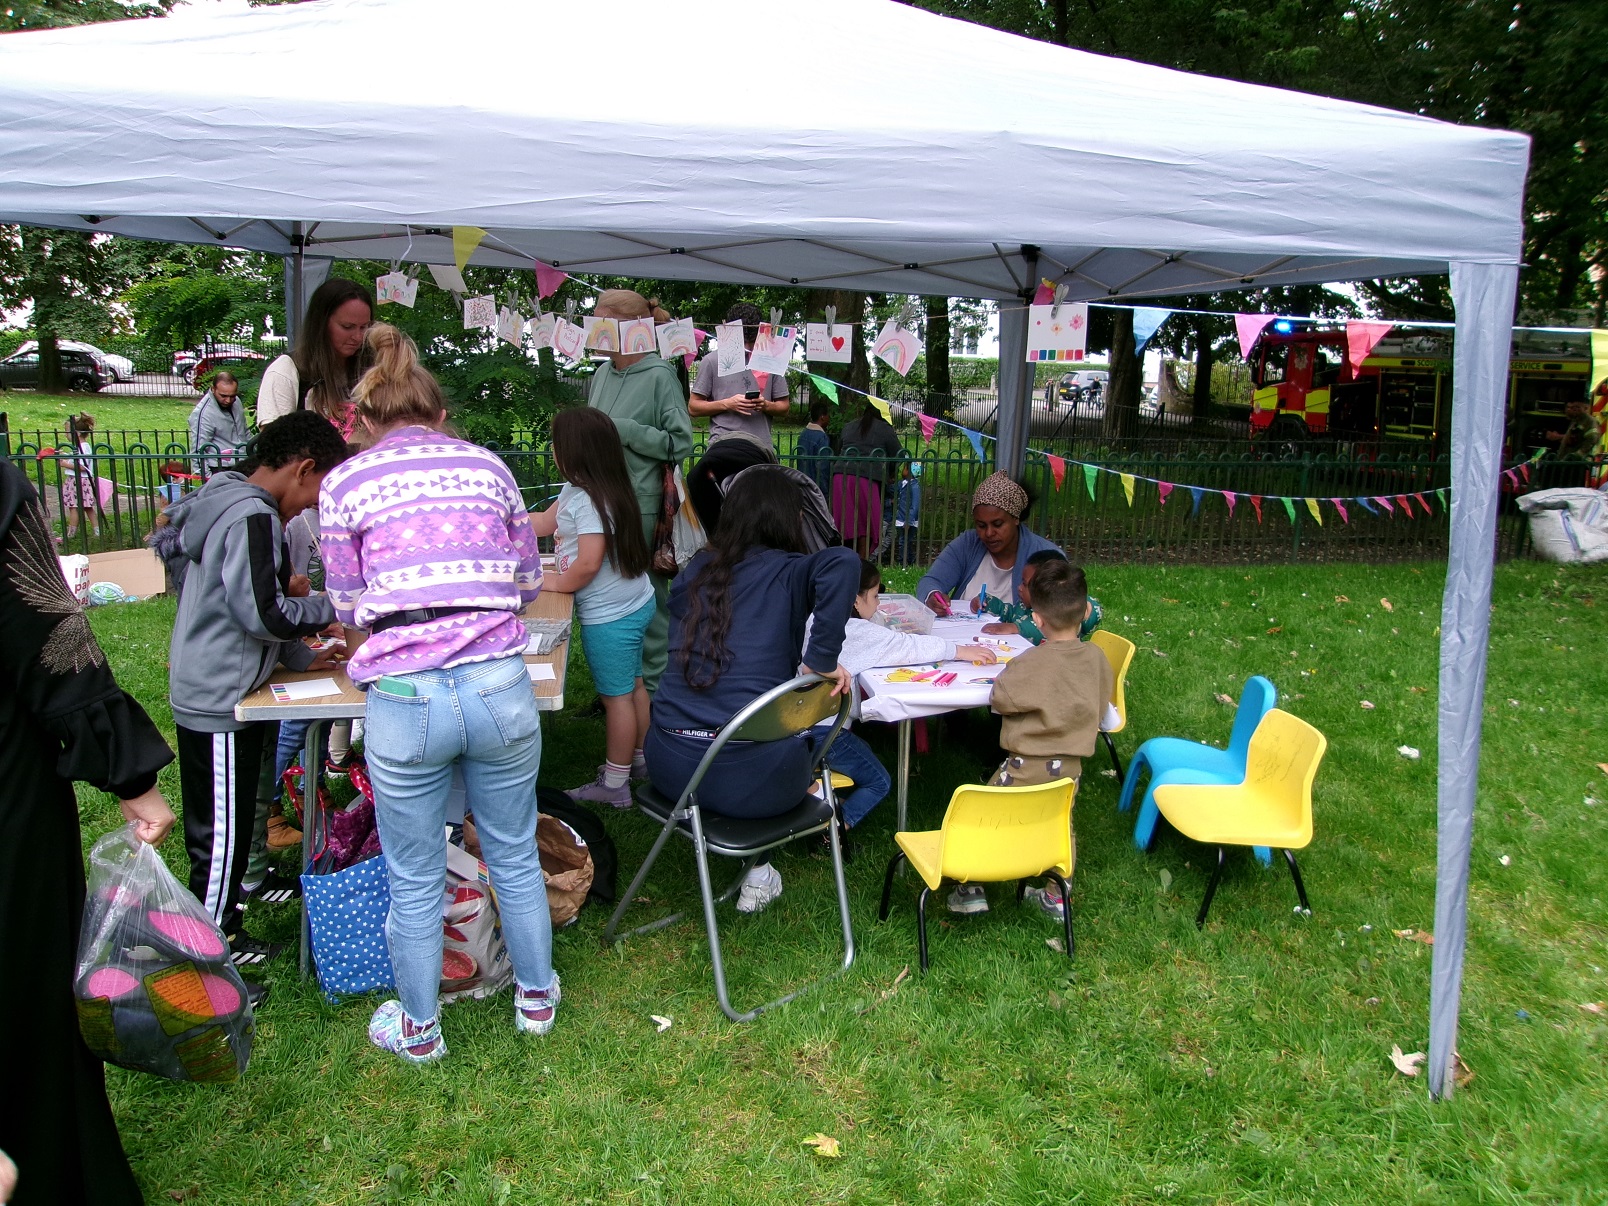 Families flock to Thenue fun day at Elcho Gardens